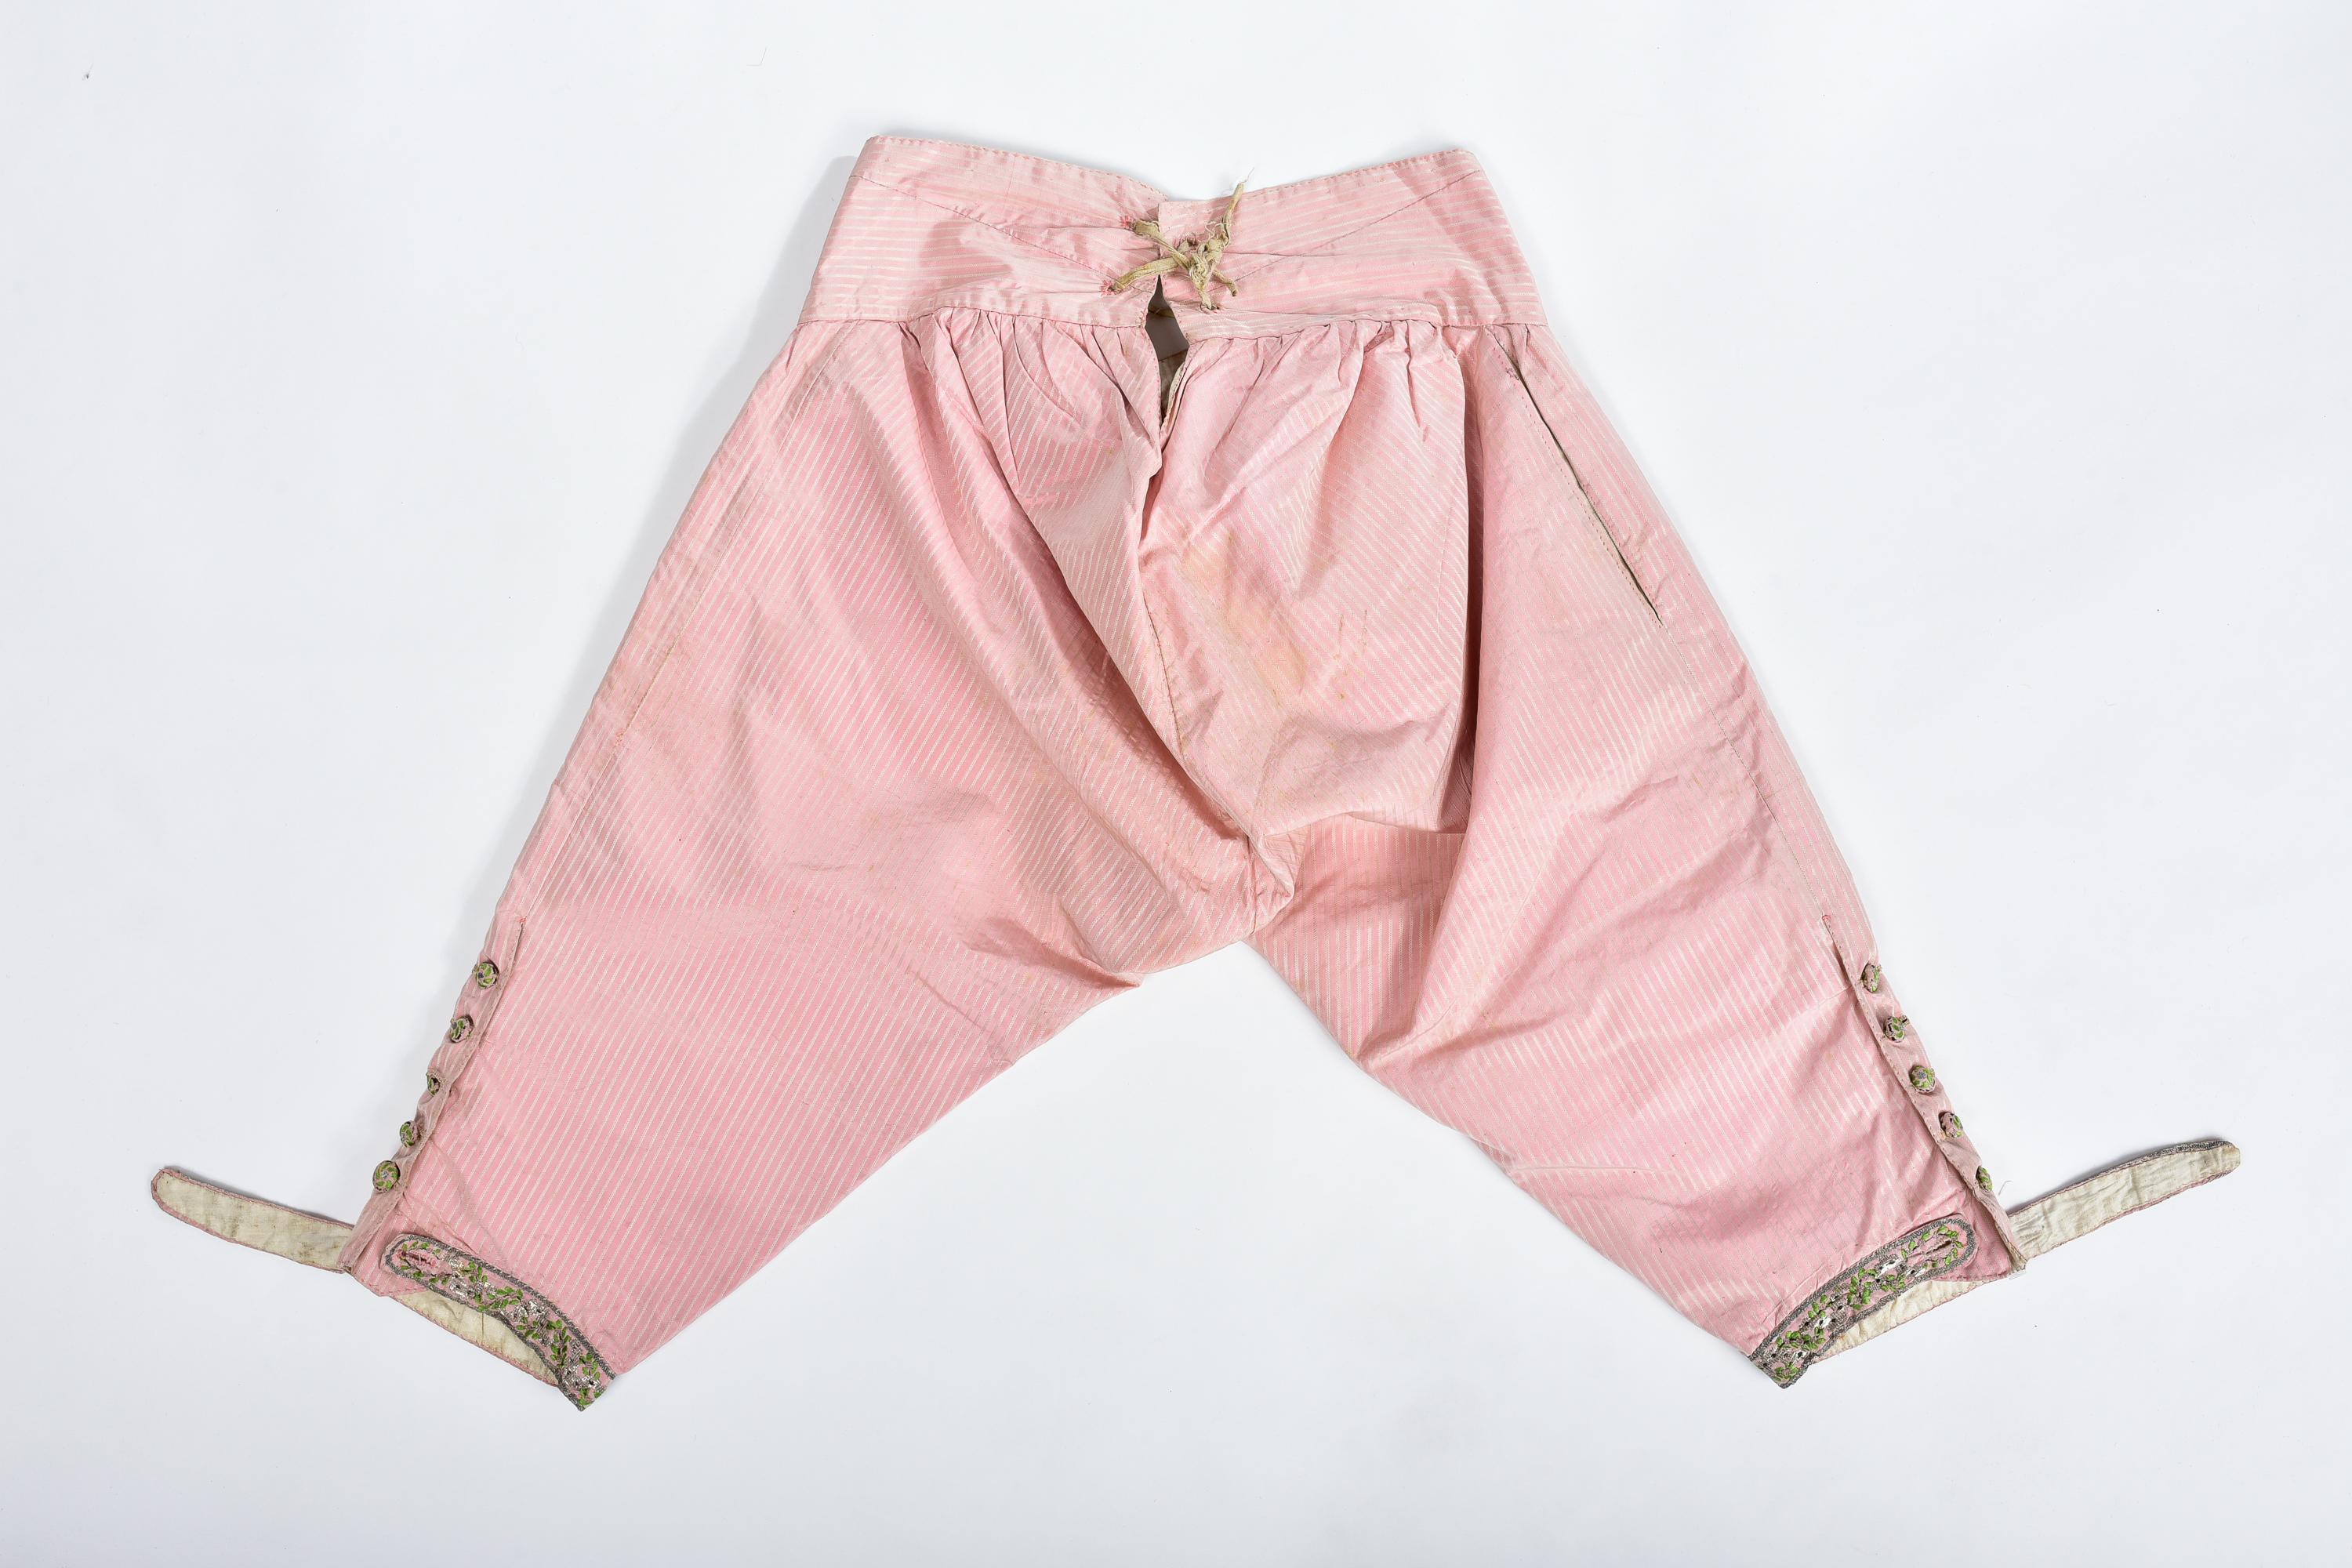 18th century trousers